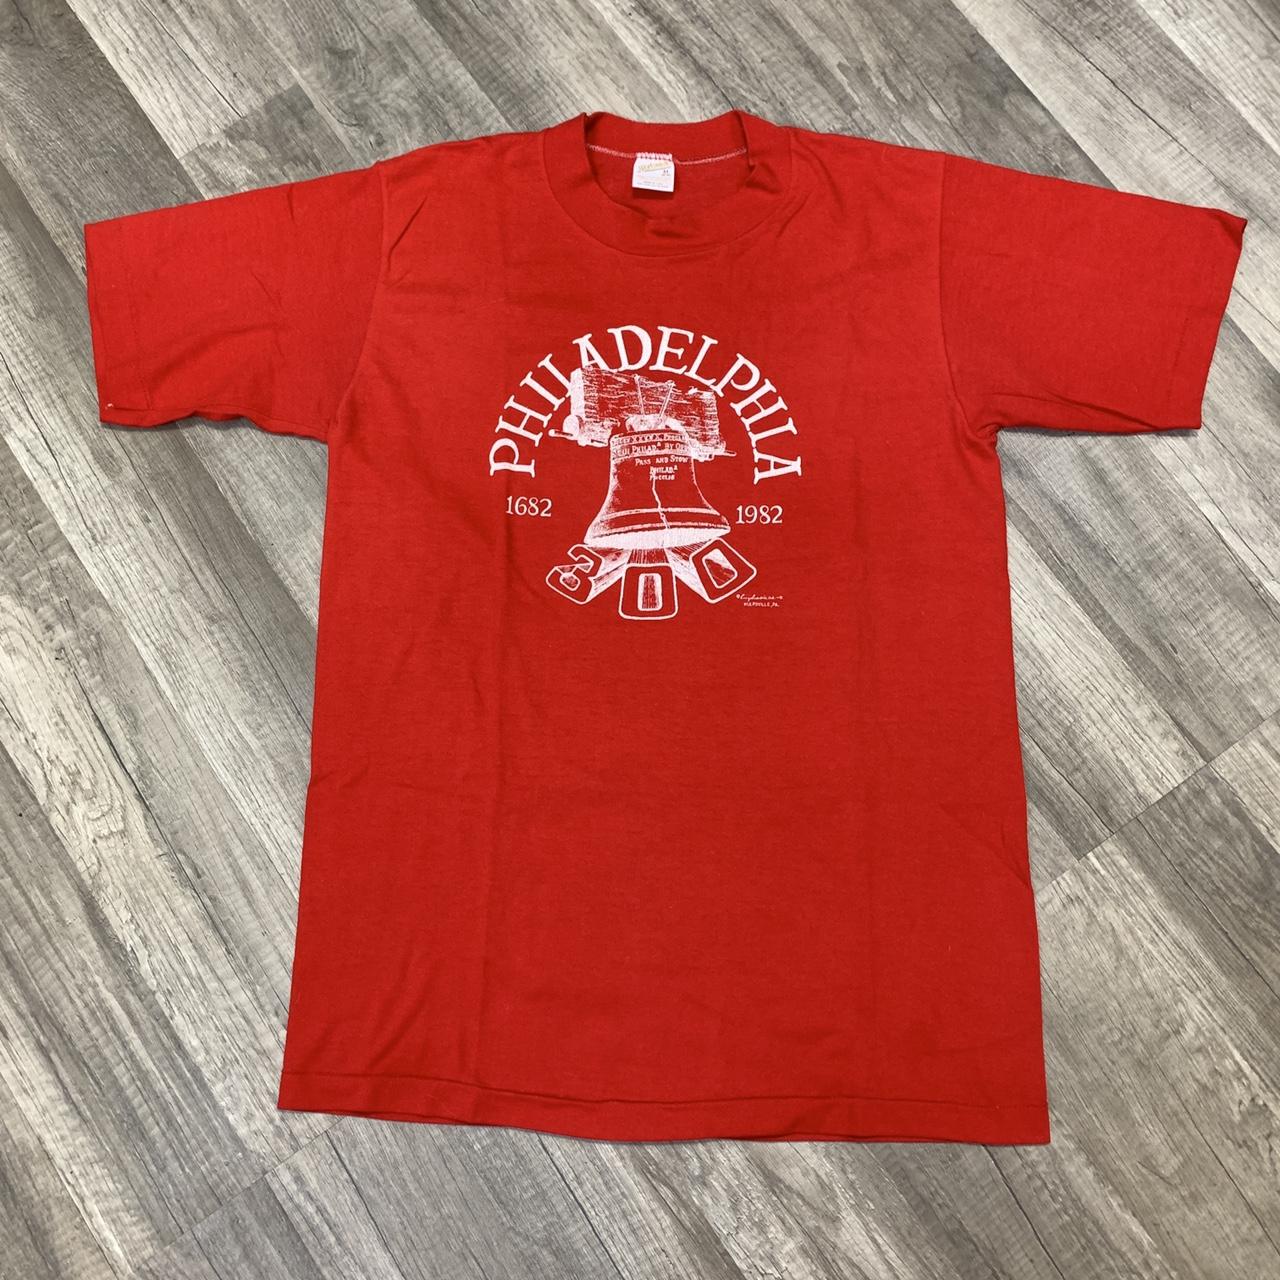 Vintage 1981 deadstock condition T-shirt, has the... - Depop